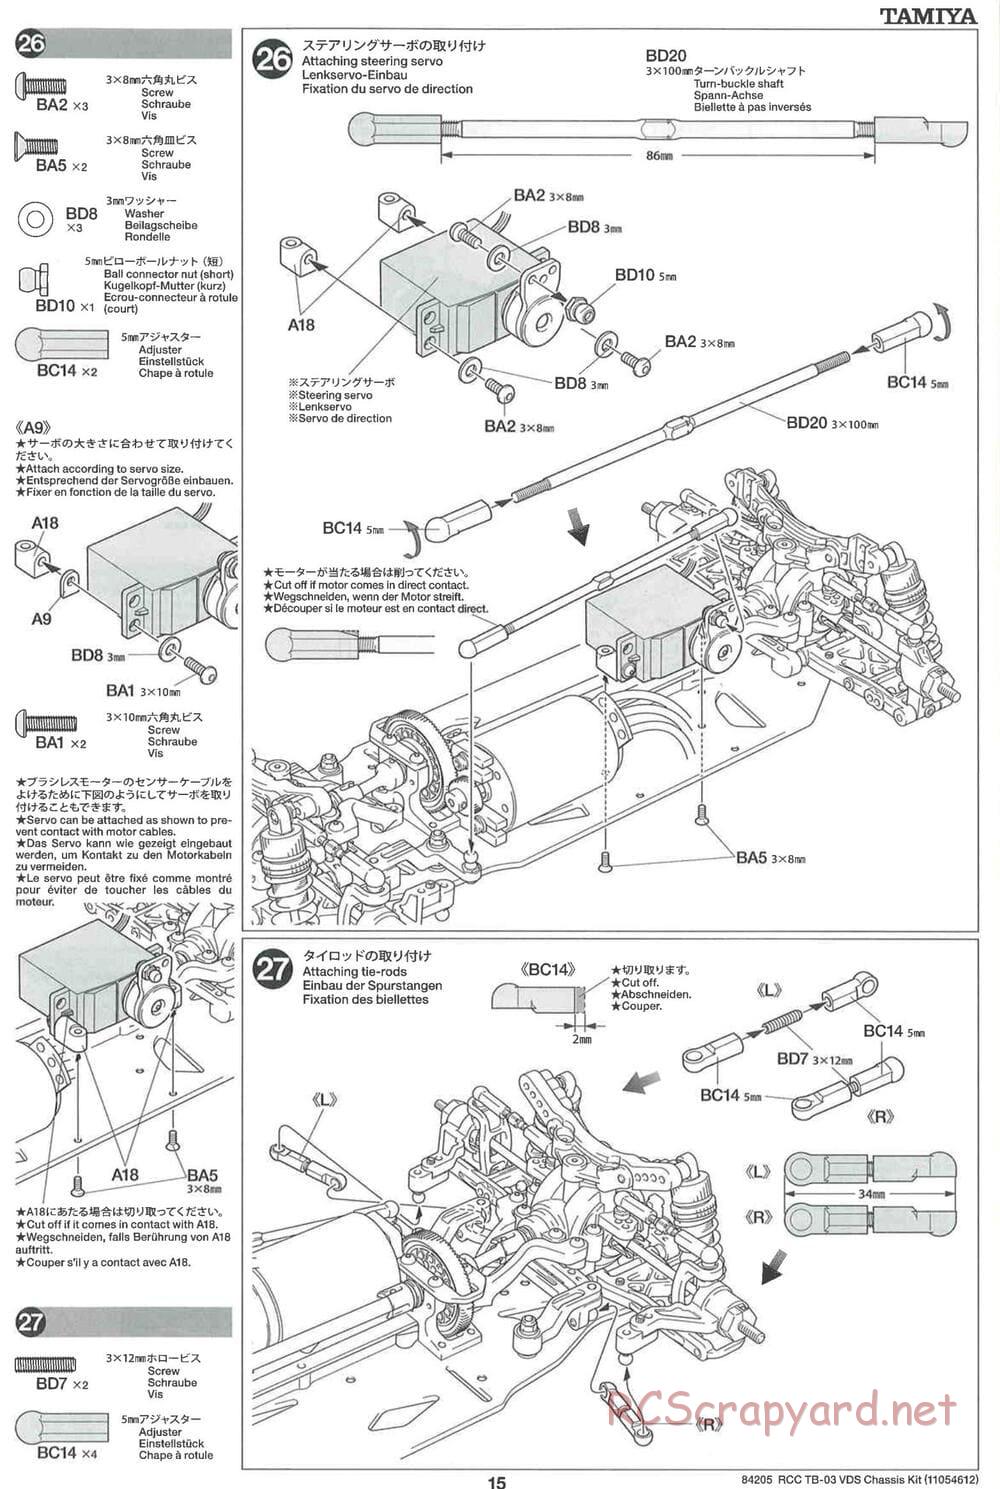 Tamiya - TB-03 VDS Drift Spec Chassis - Manual - Page 15